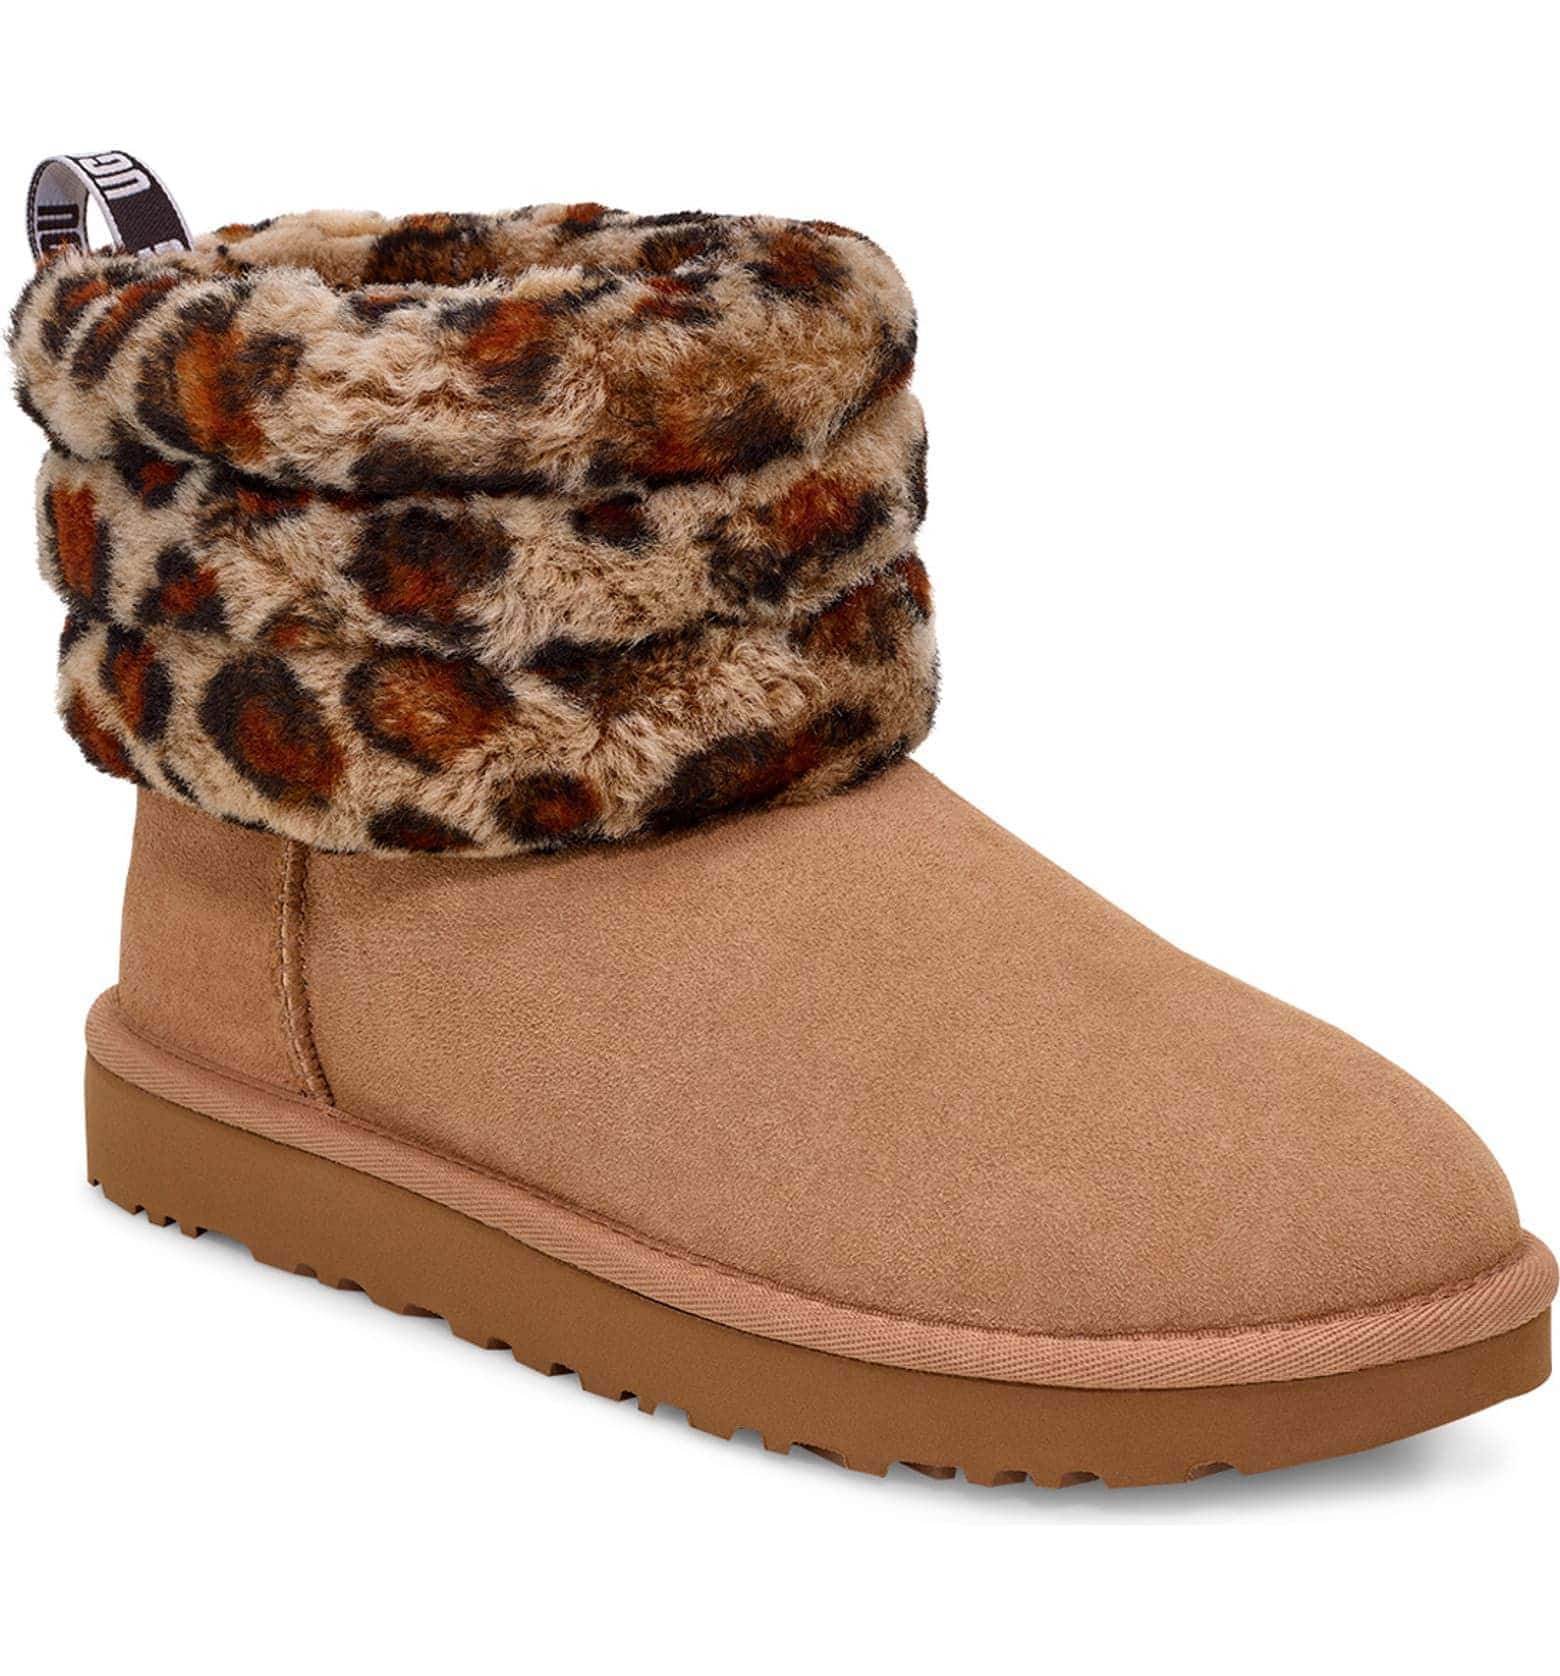 UGG Quilted Leopard Print Boot - Cookies and Cups